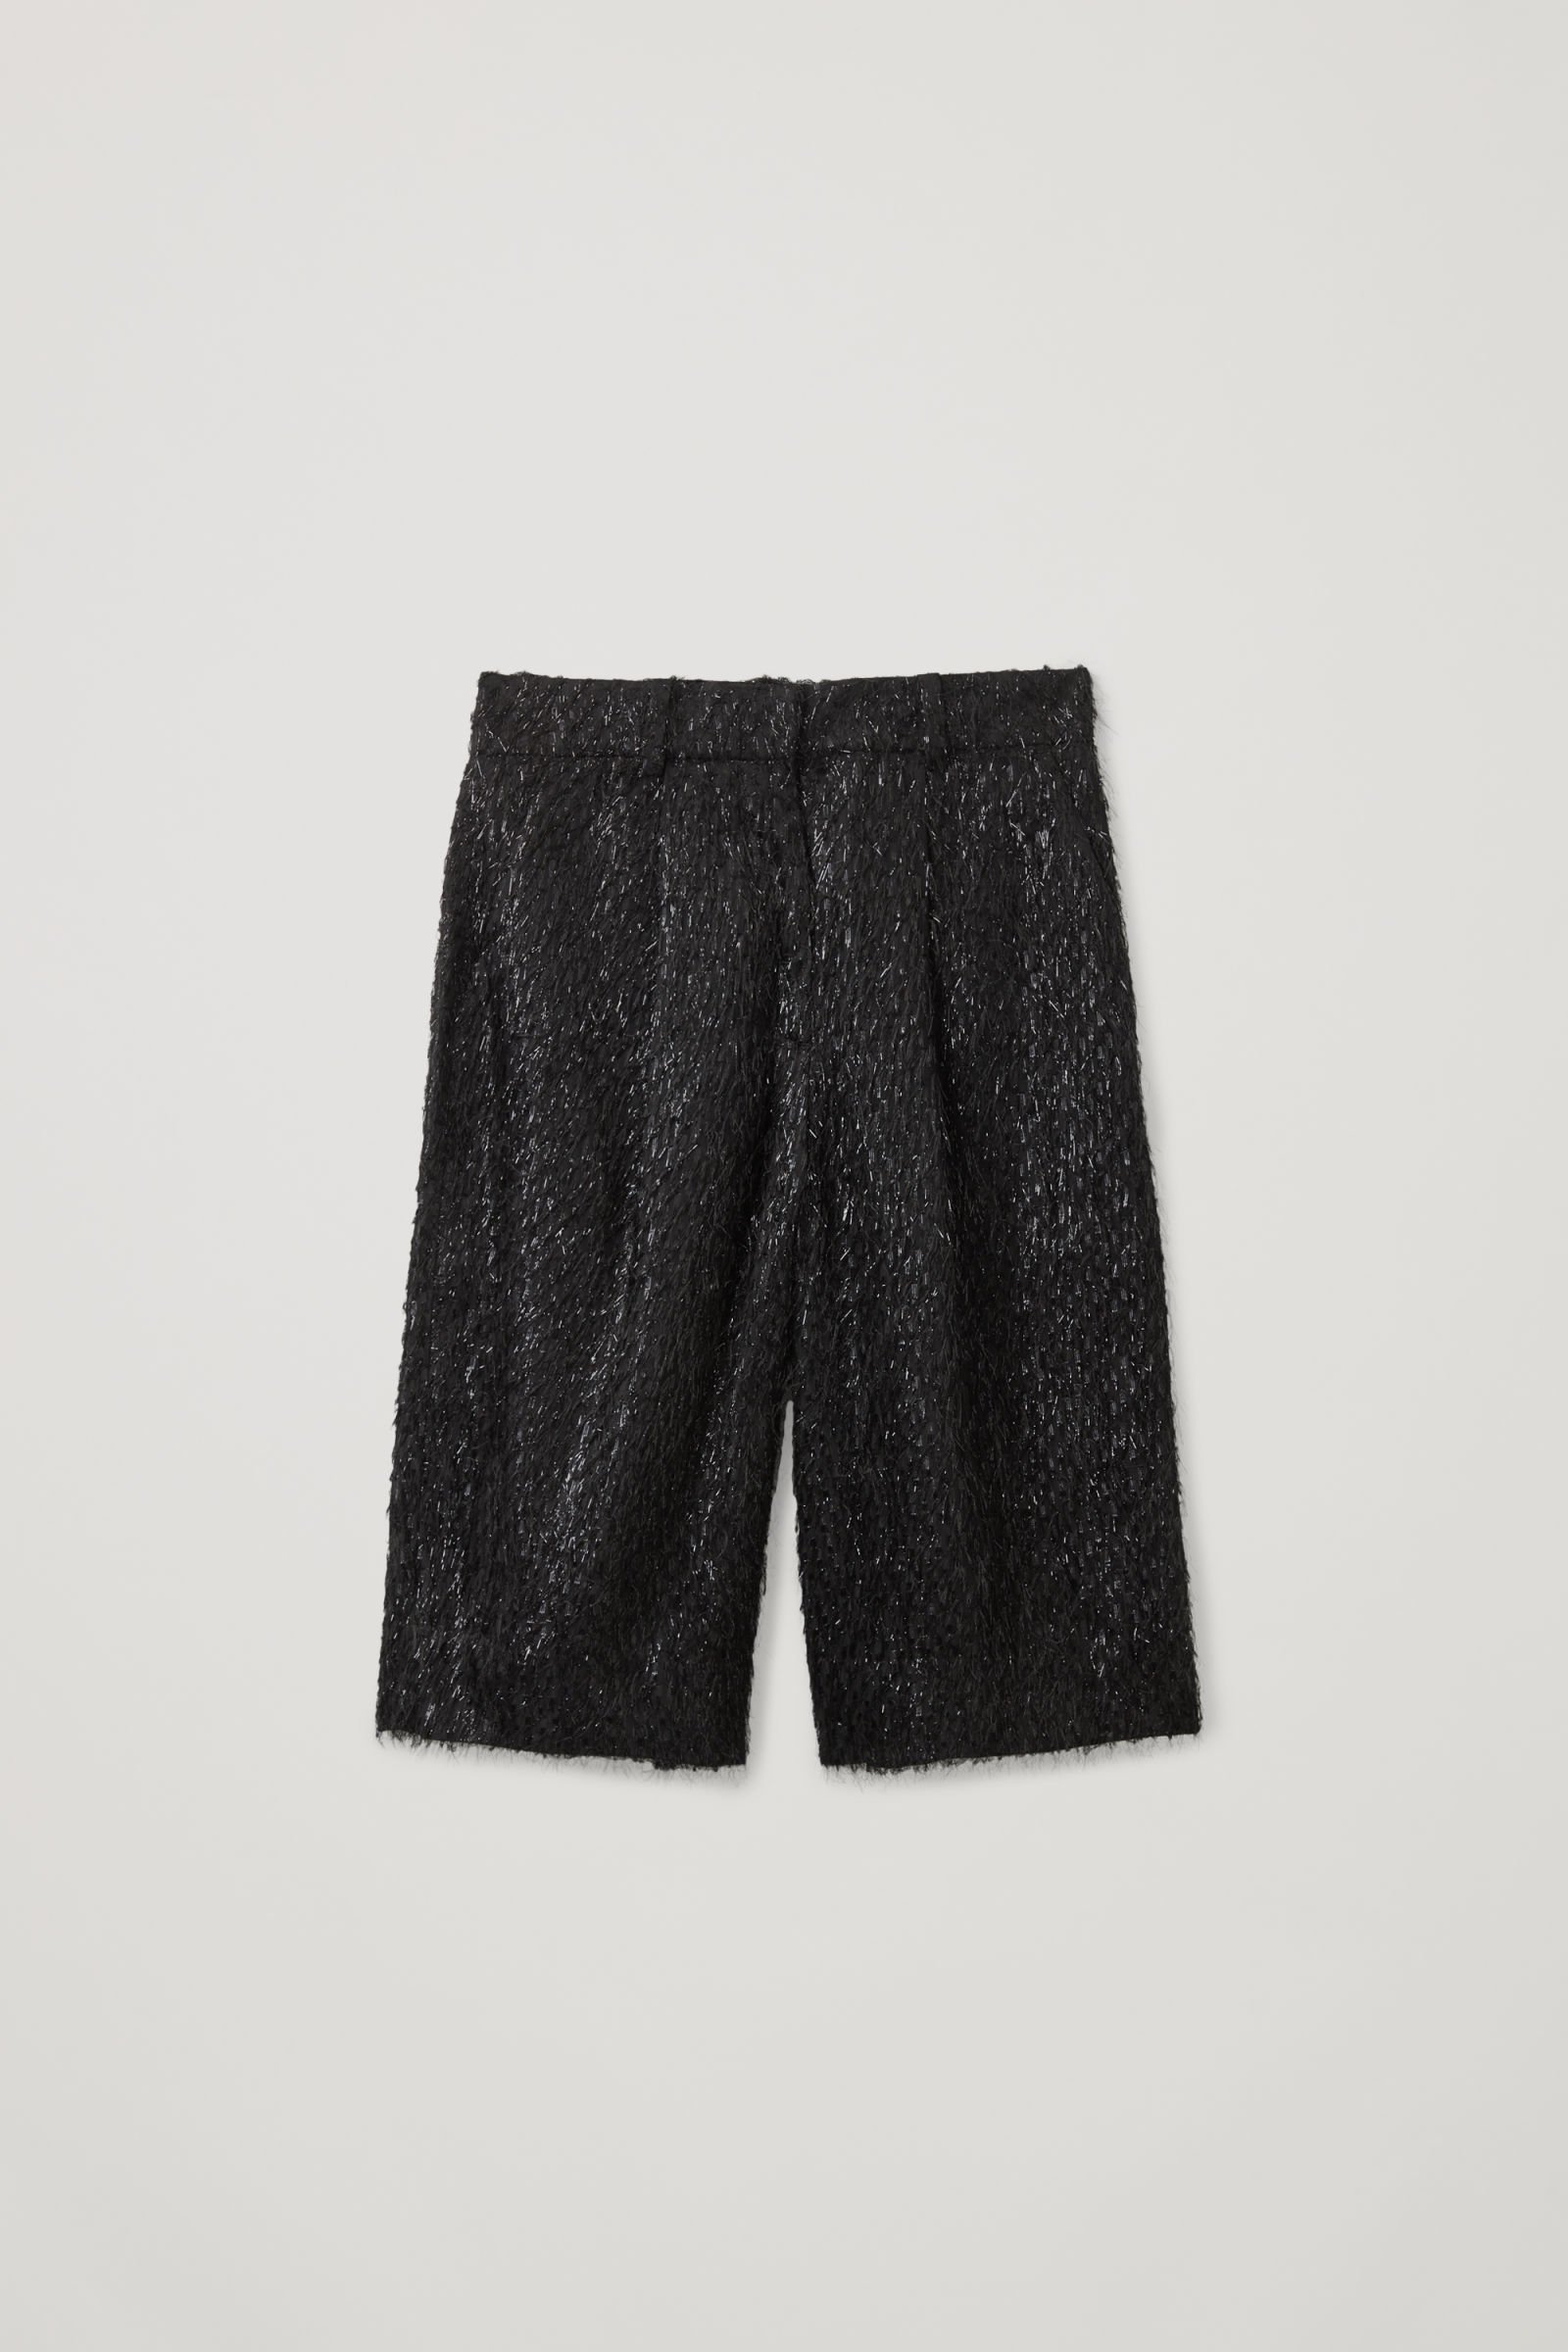 COS Tailored Feathered Shorts in black | Endource